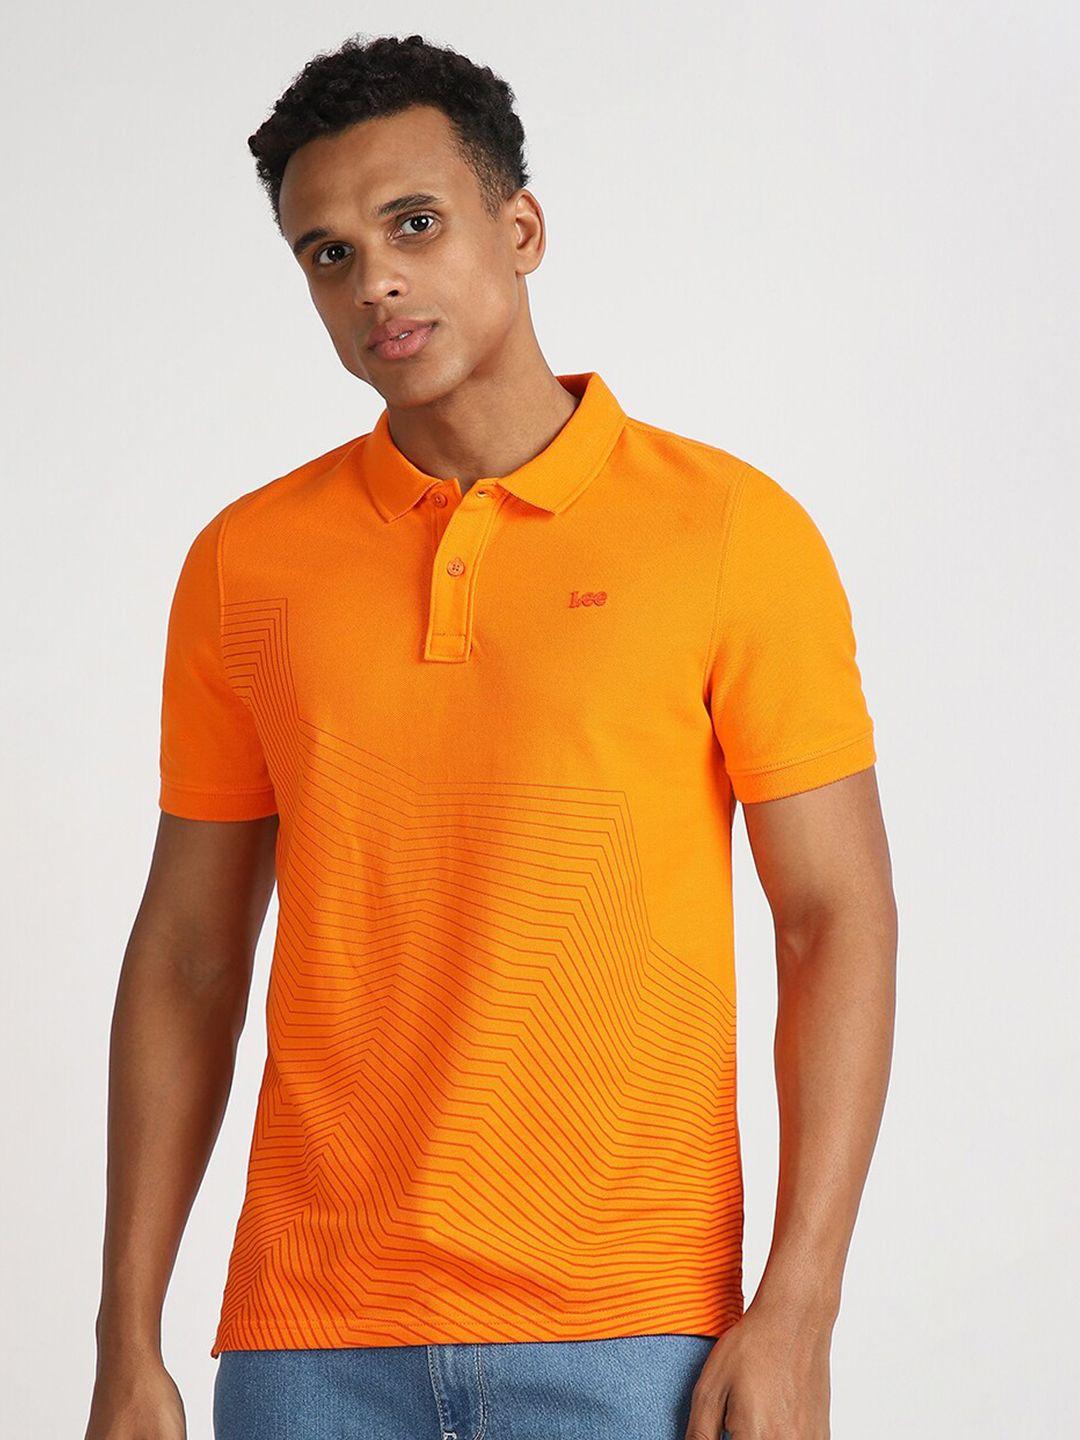 lee-polo-collar-short-sleeve-slim-fit-cotton-t-shirt